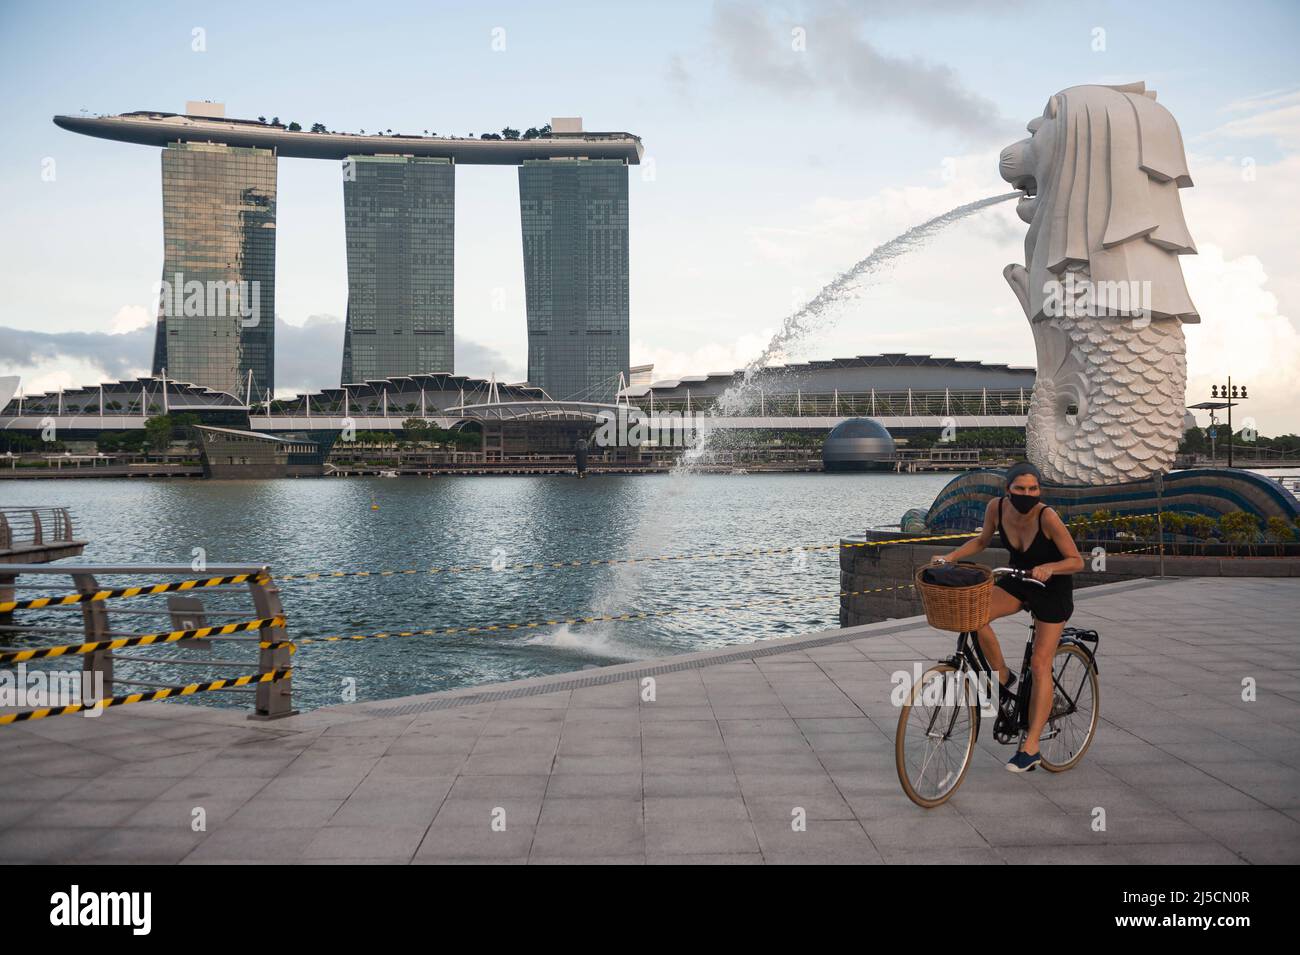 28.05.2020, Singapore, Republic of Singapore, Asia - A woman rides her bicycle along the otherwise deserted Merlion Park on the banks of the Singapore River during curfew, wearing a mouth guard to protect herself from contracting the pandemic coronavirus. In the background you can see the Marina Bay Sands Hotel. Usually the area around Marina Bay is teeming with tourists, but now it is completely deserted except for a few people due to Covid-19. [automated translation] Stock Photo